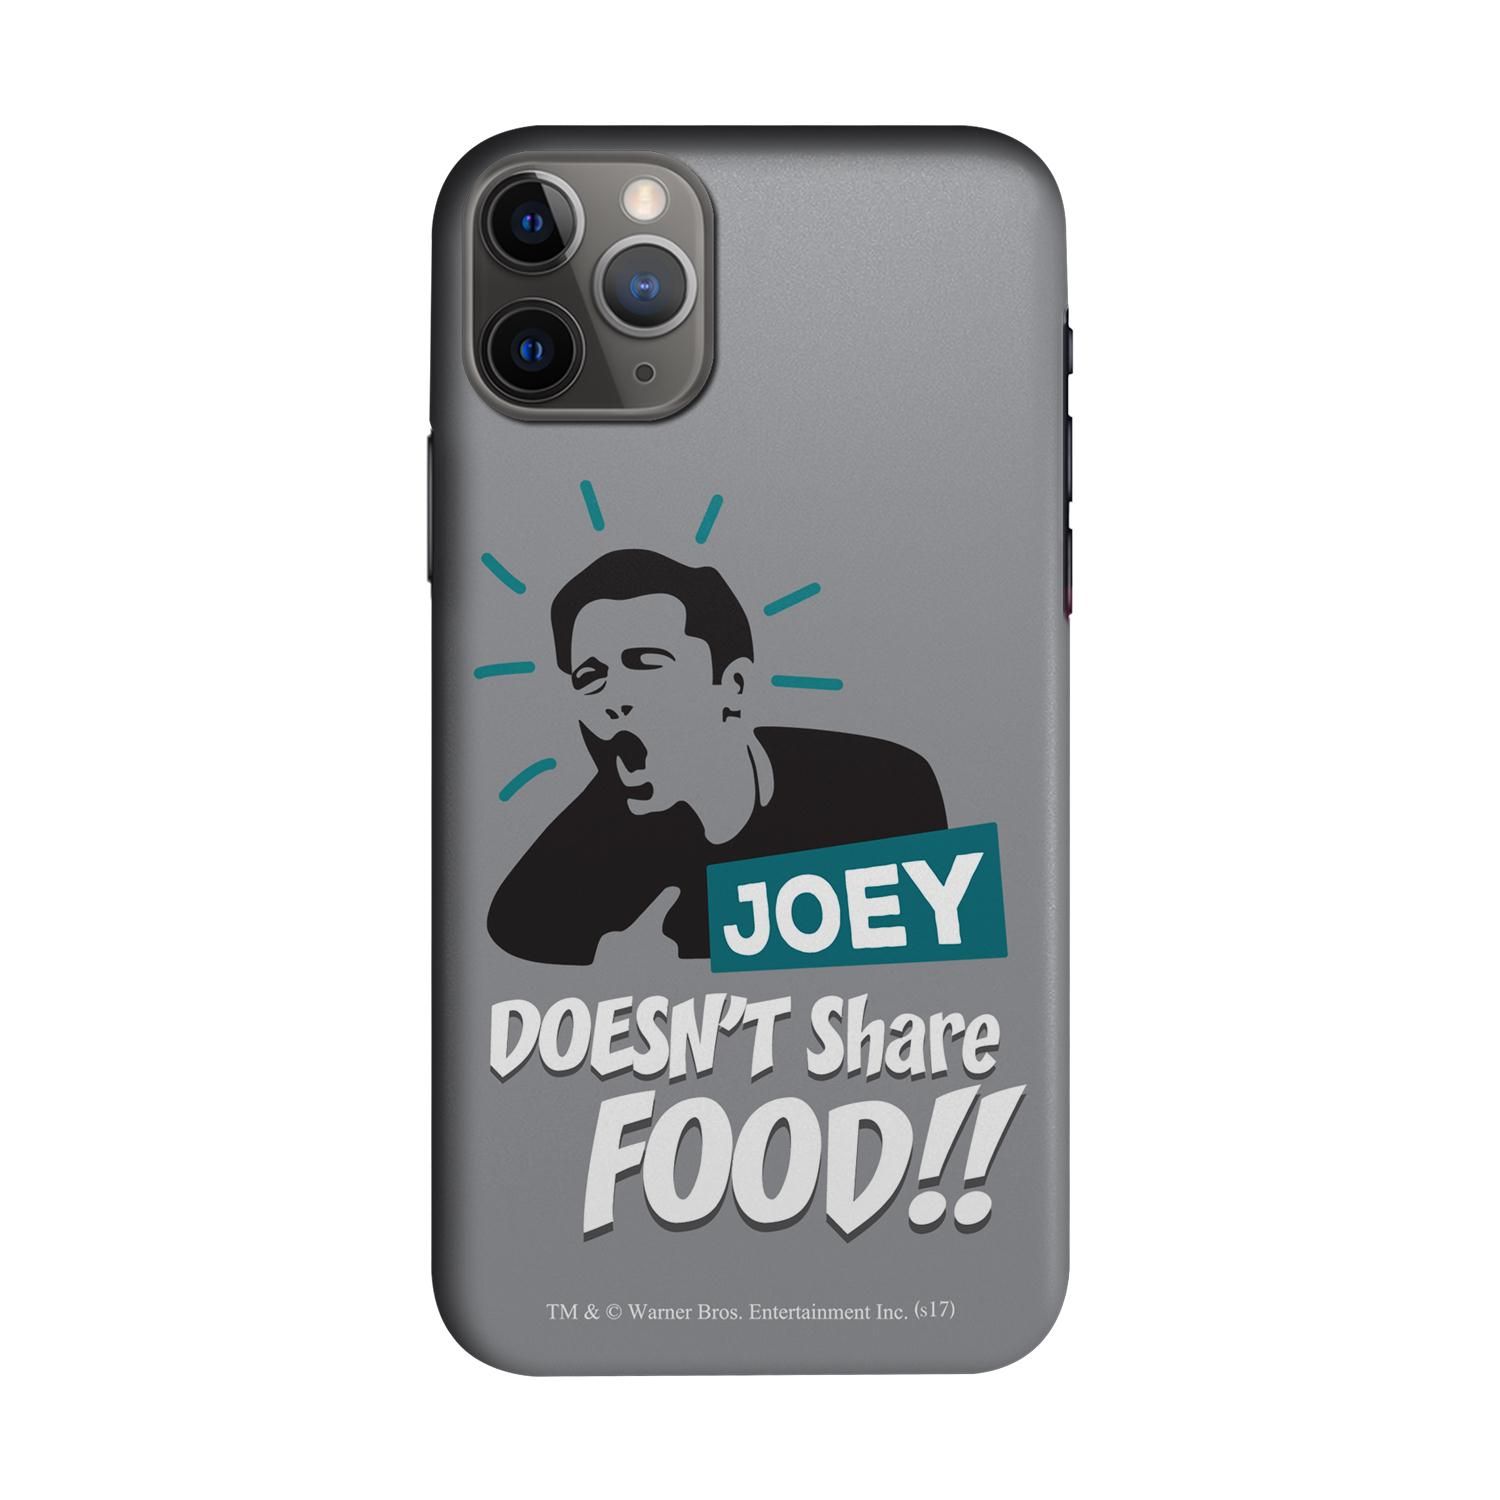 Buy Friends Joey doesnt share food - Sleek Phone Case for iPhone 11 Pro Max Online